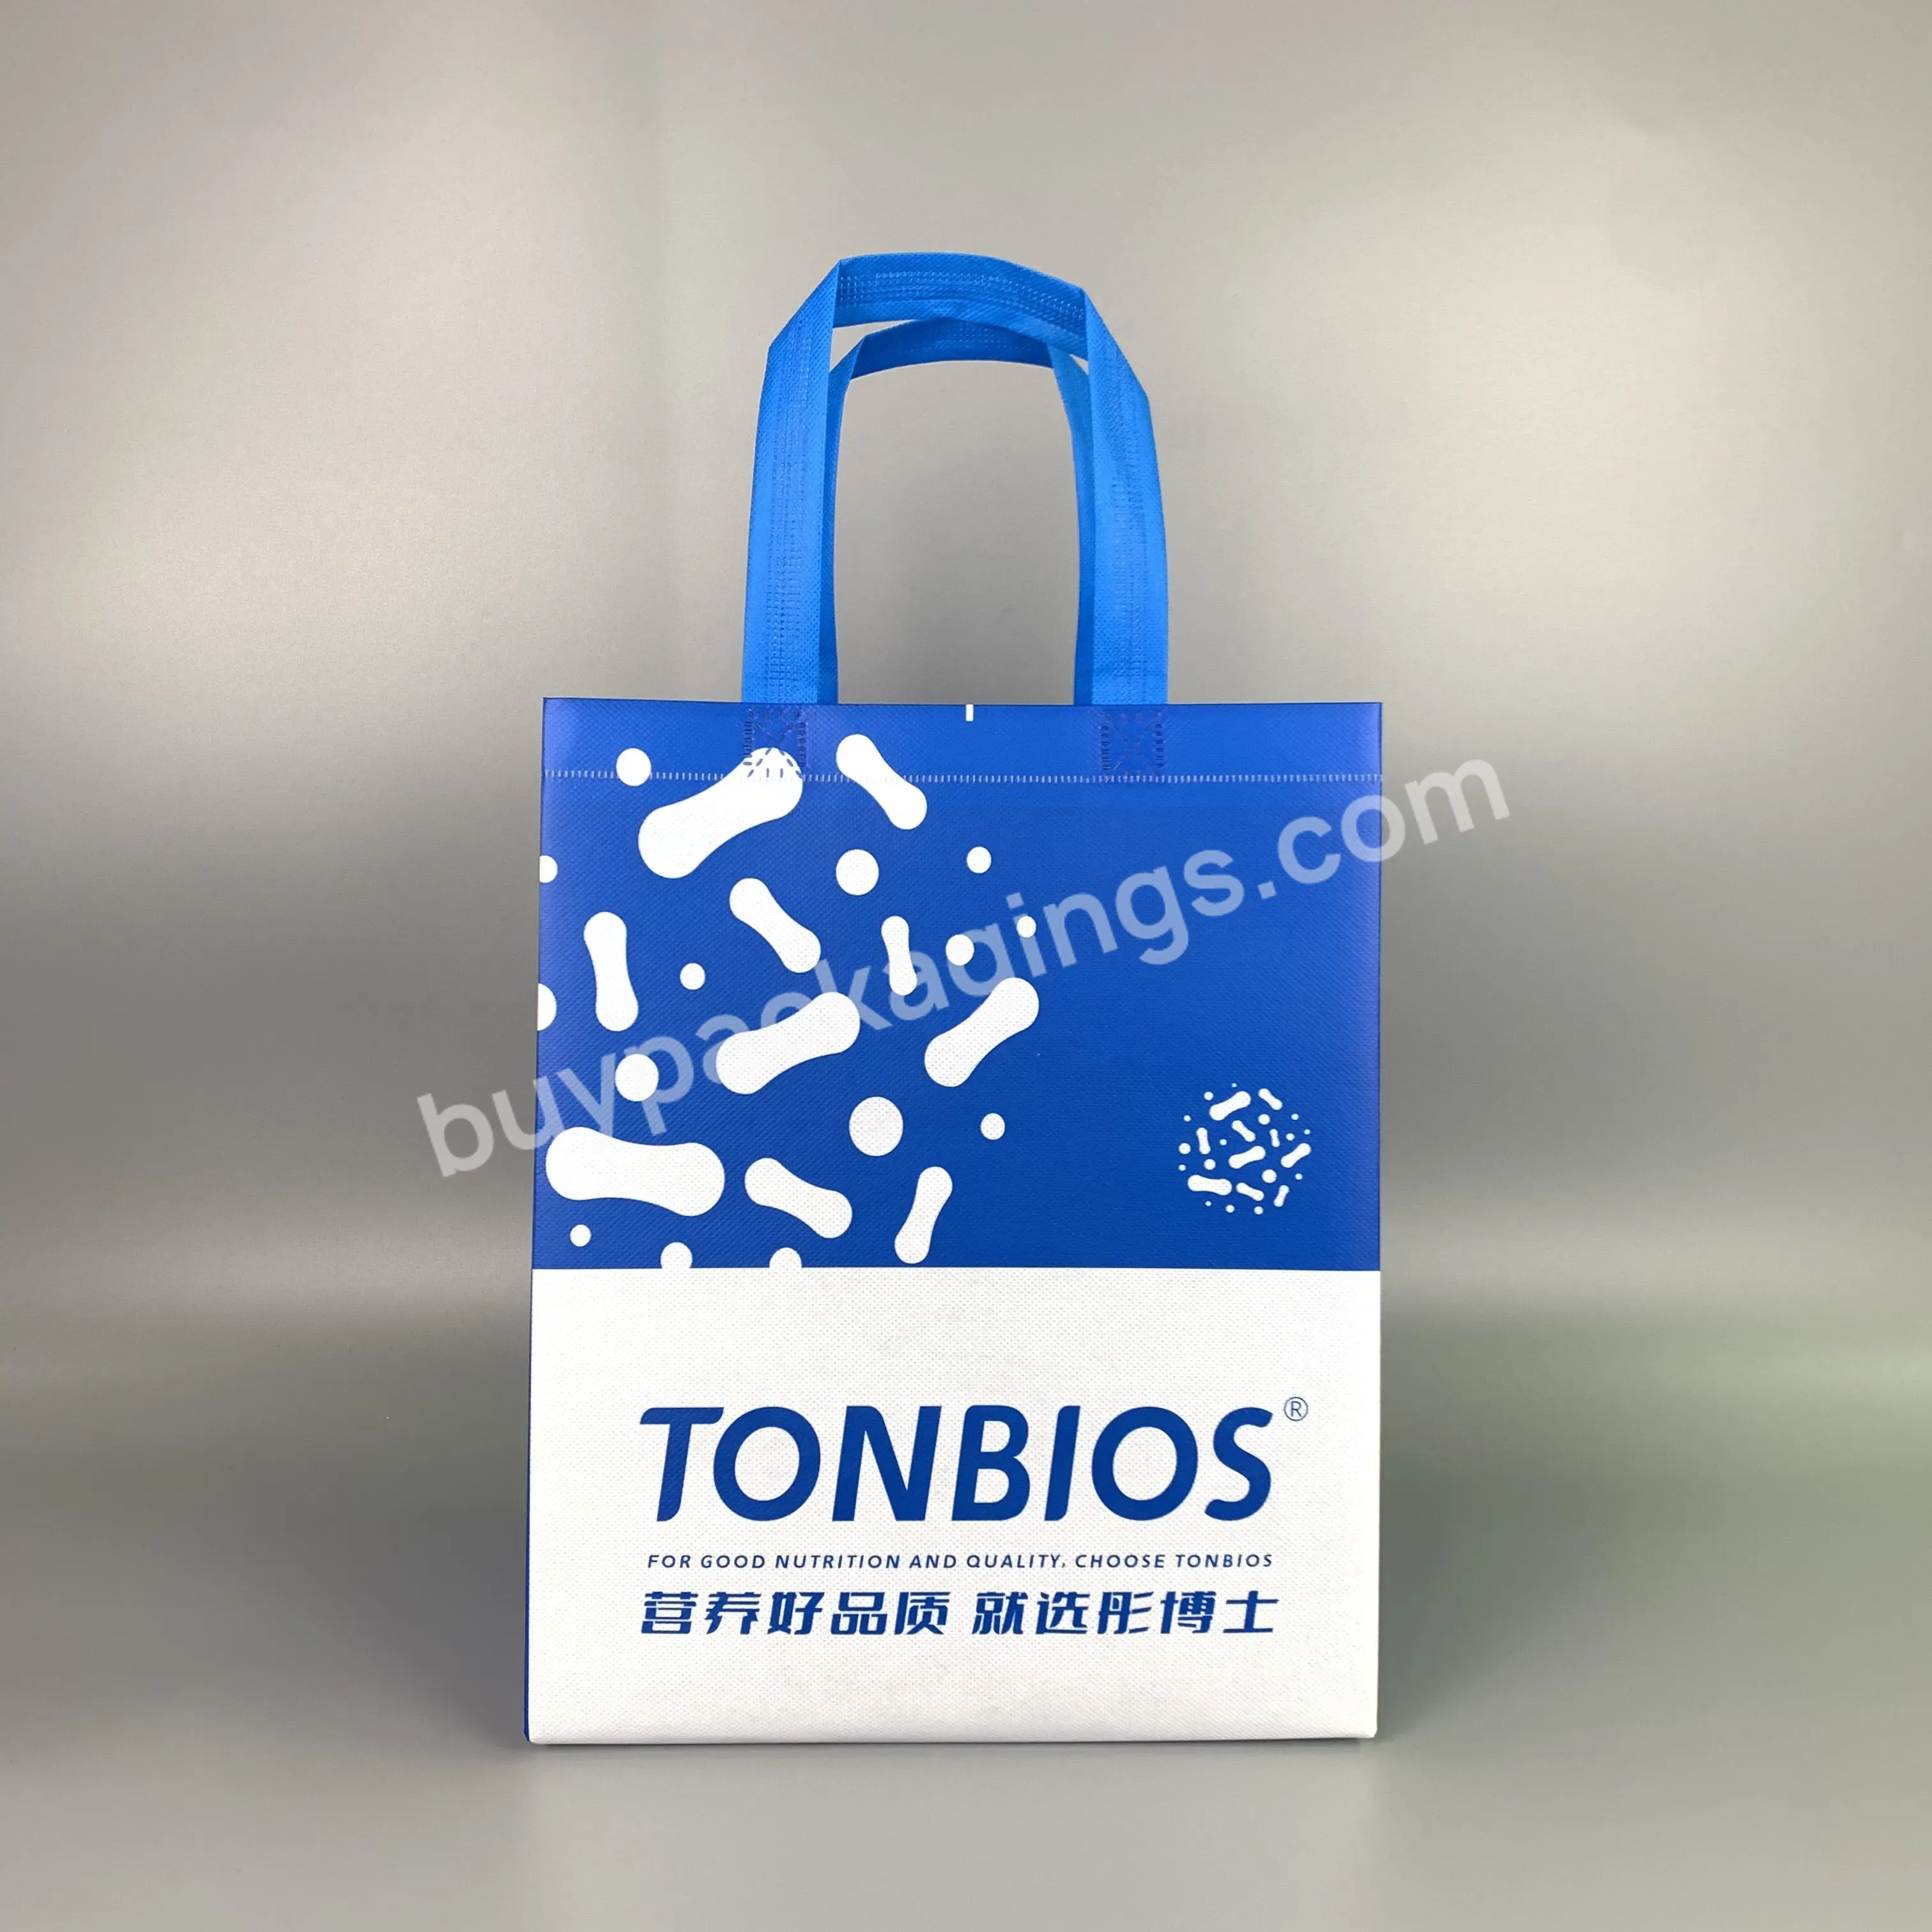 Whole Sale Durable Reusable Recyclable Biodegradable Oilproof Laminated Non Woven Bag For Shopping - Buy Durable Reusable Shopping Bag,Recyclable Biodegradable Non Woven Bag,Foldable Laminated Non Woven Bag.